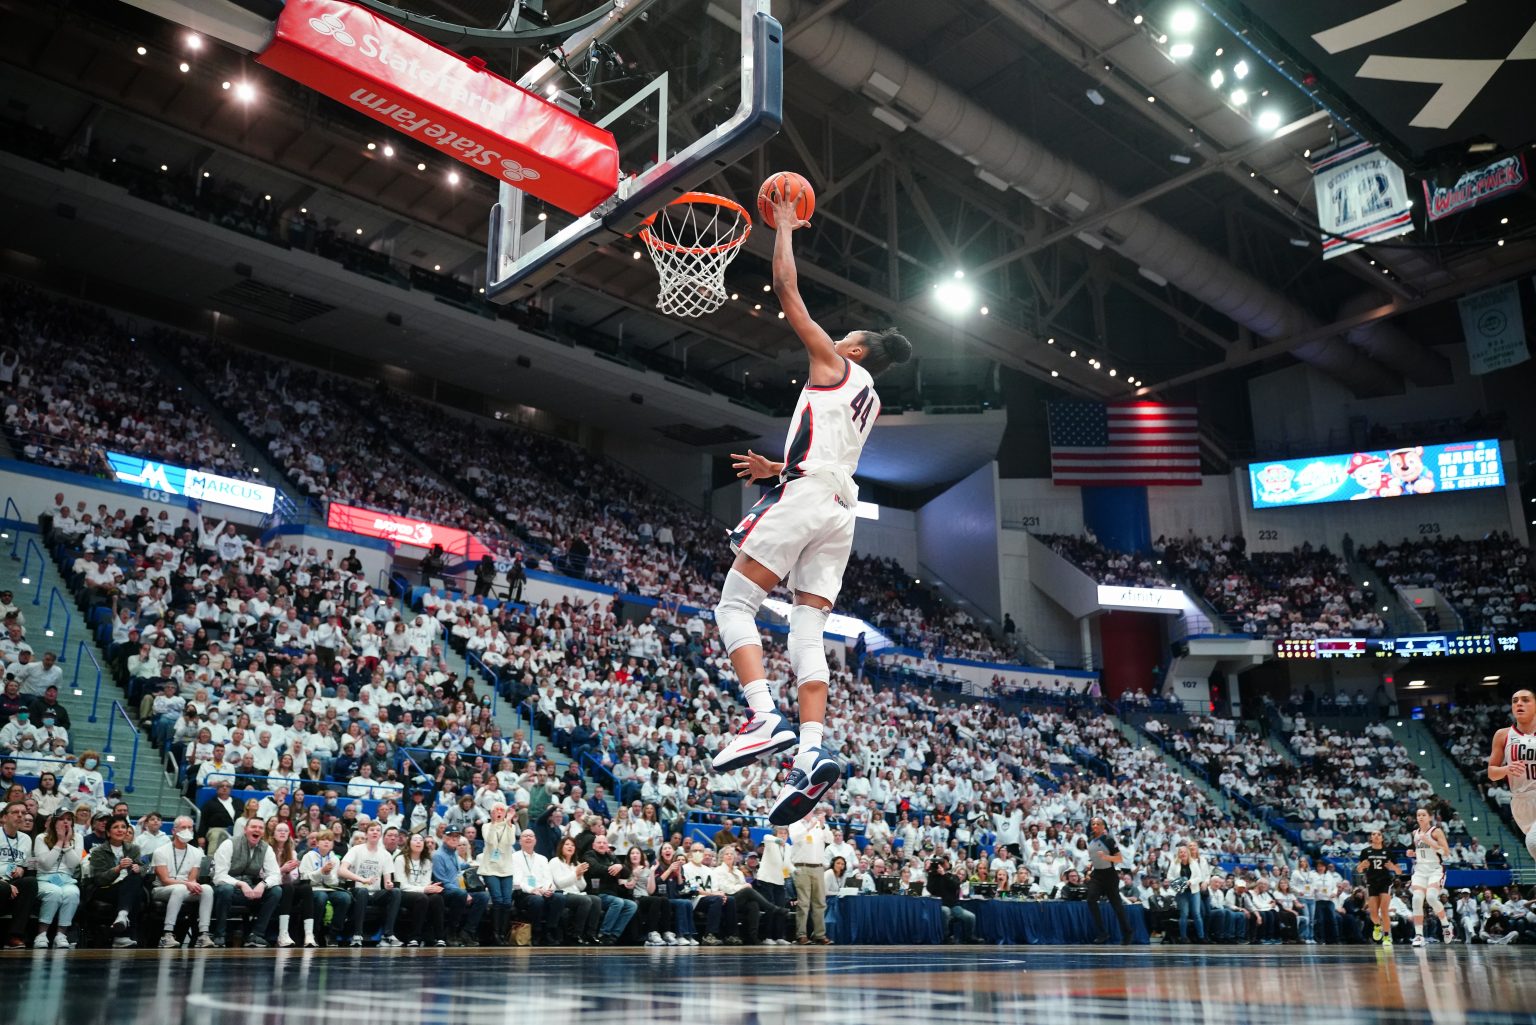 A Black woman's basketball player wearing a #44 UConn jersey jumps to make a shot into the opposing team's basketball hoop in a large arena with a crowd full of fans wearing white shirts, many with their mouths open expressing awe and excitement